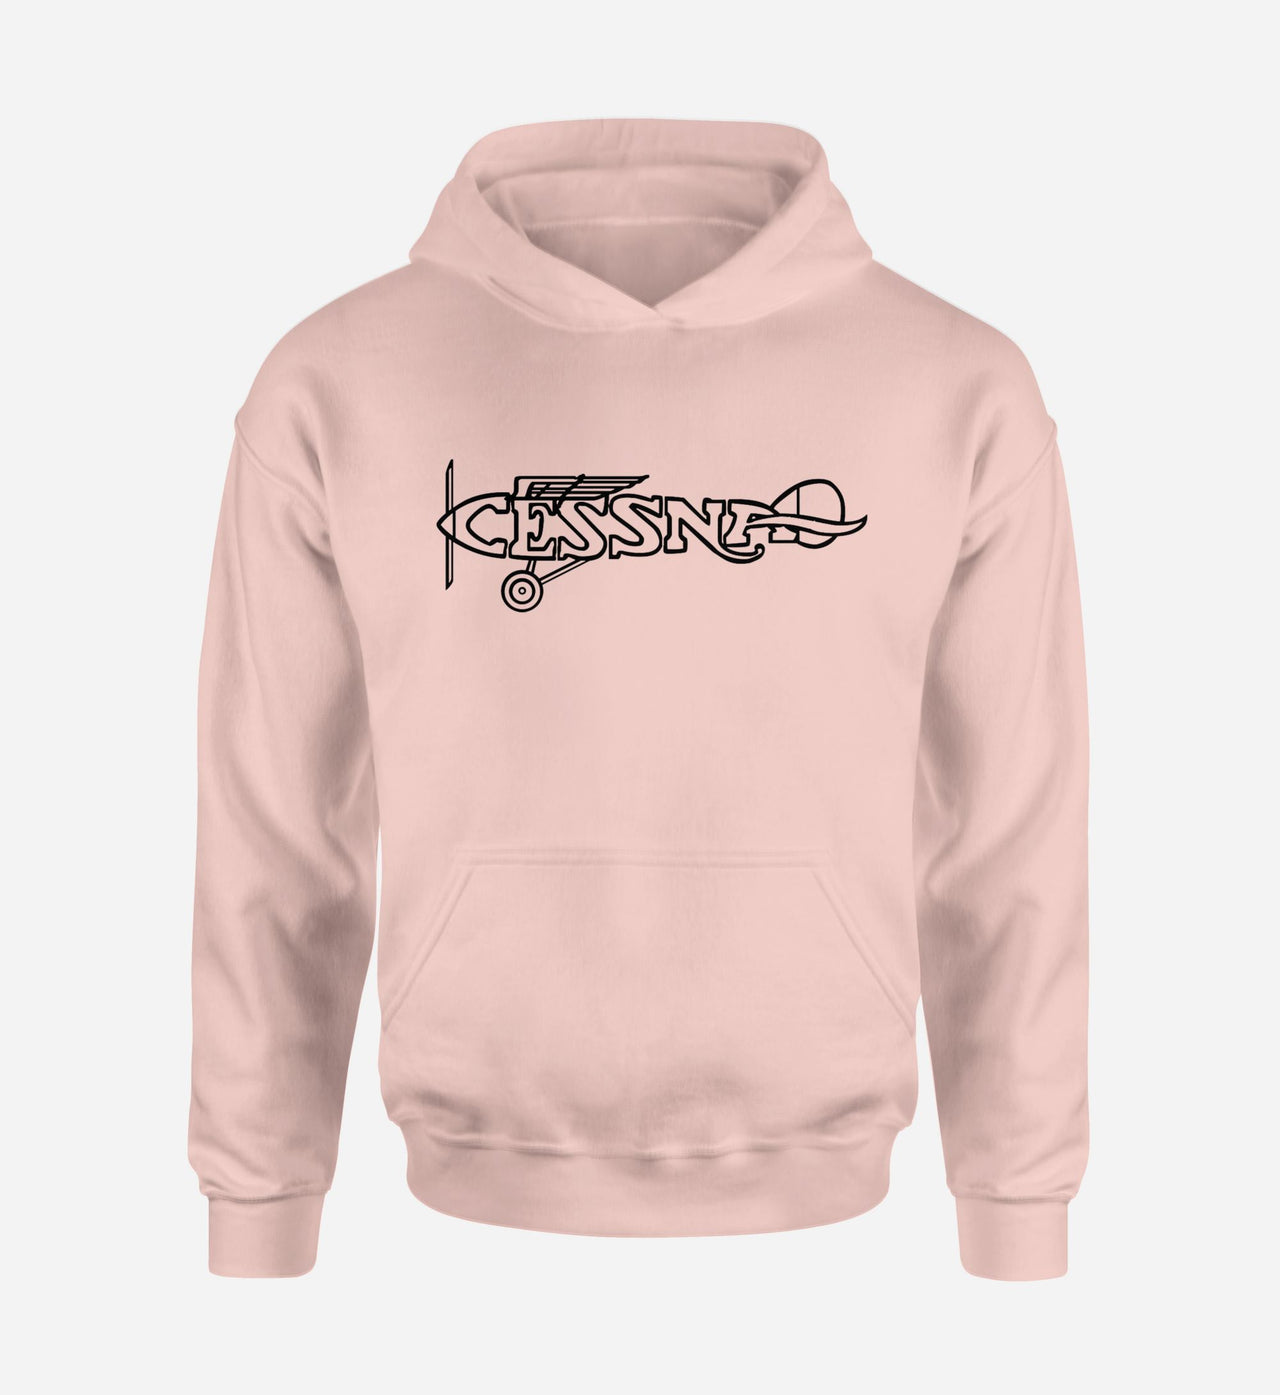 Special Cessna Text Designed Hoodies